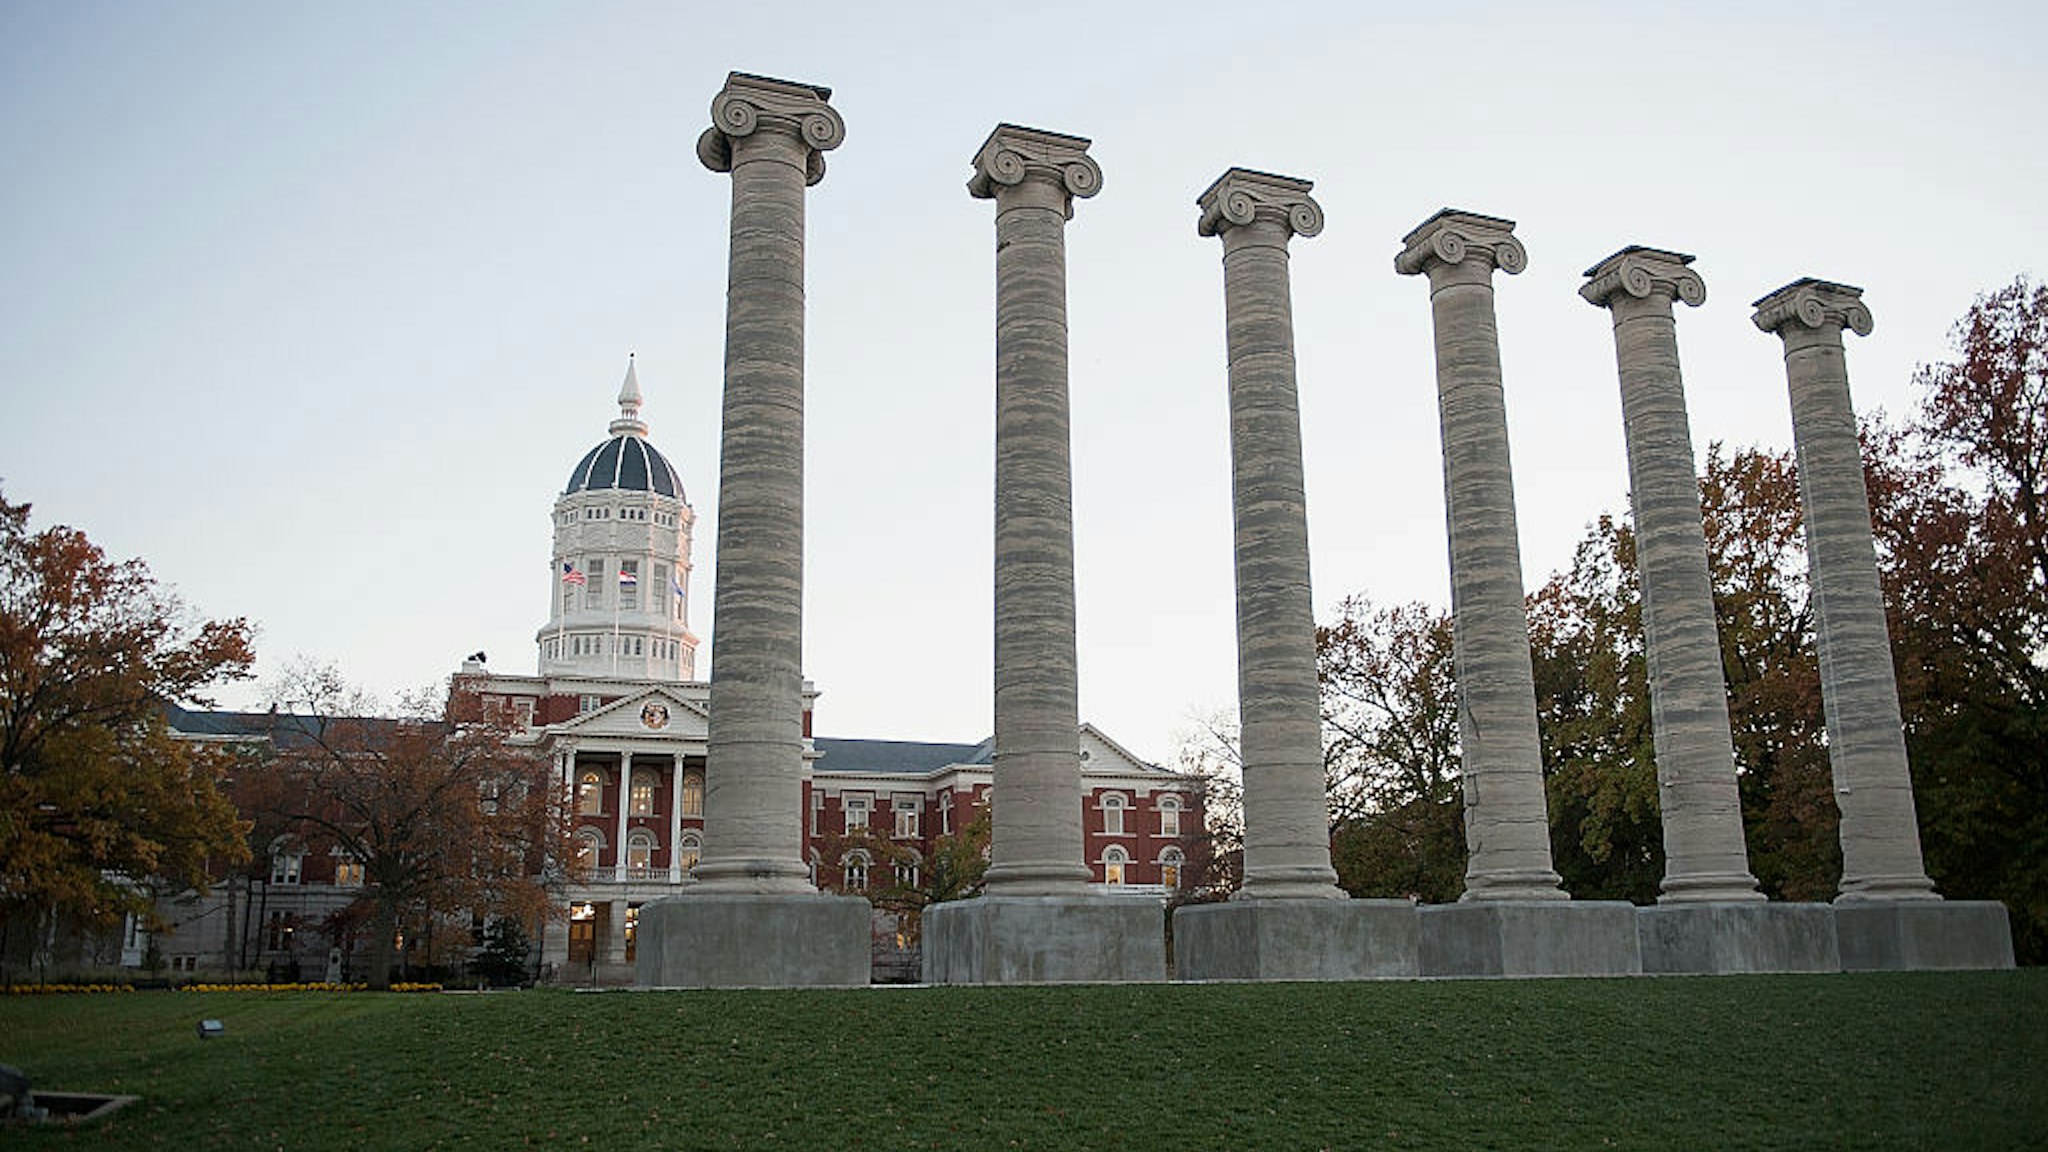 Academic Hall on the campus of University of Missouri - Columbia is seen on November 10, 2015 in Columbia, Missouri. The university looks to get things back to normal after the recent protests on campus that lead to the resignation of the school's President and Chancellor on November 9.